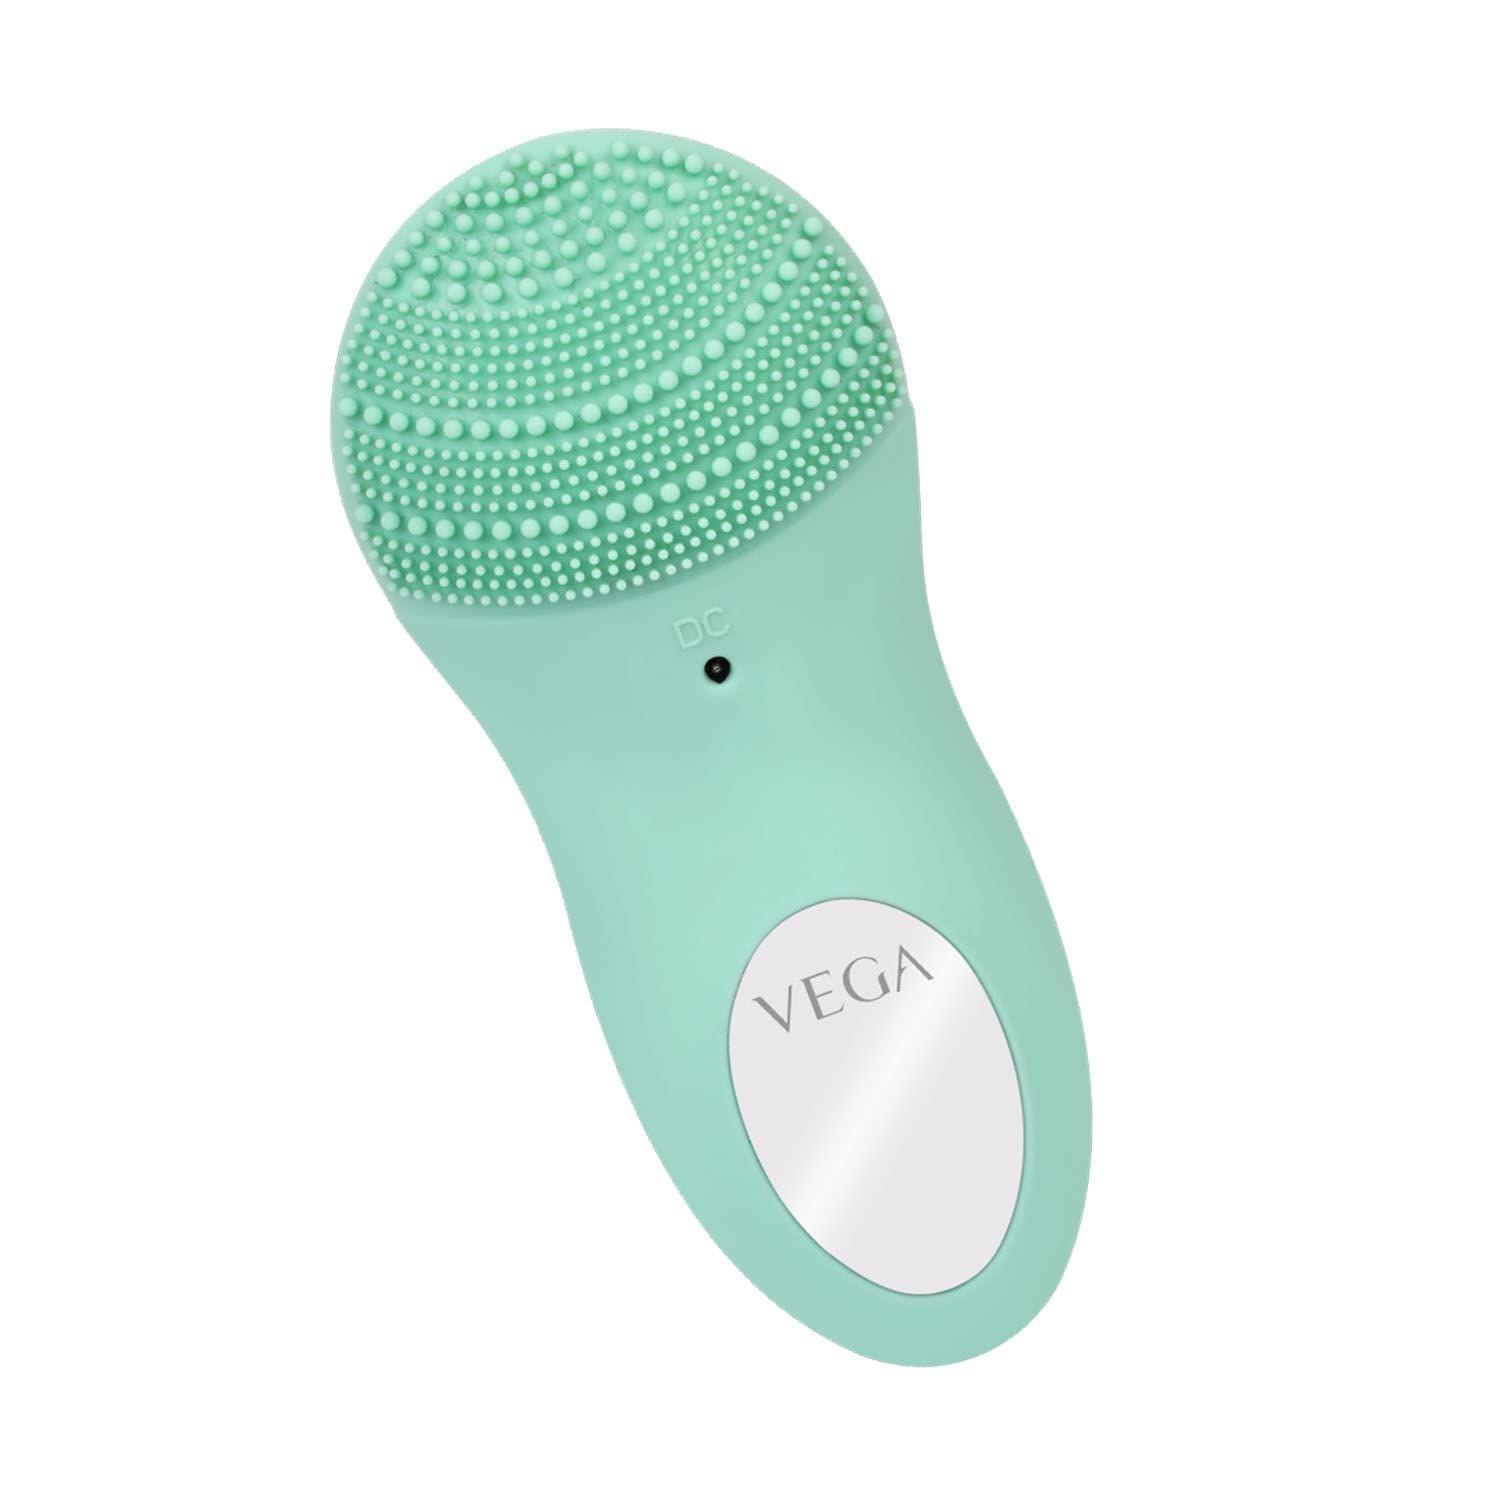 VEGA 3 In 1 Facial Cleanser & Massager With Sonic Vibration Technique For Cleansing, Exfoliation & Massaging, 120 Mins Runtime, 10 Adjustable Vibration Speed Settings & IPX 6 Washable, (VHFC-02)